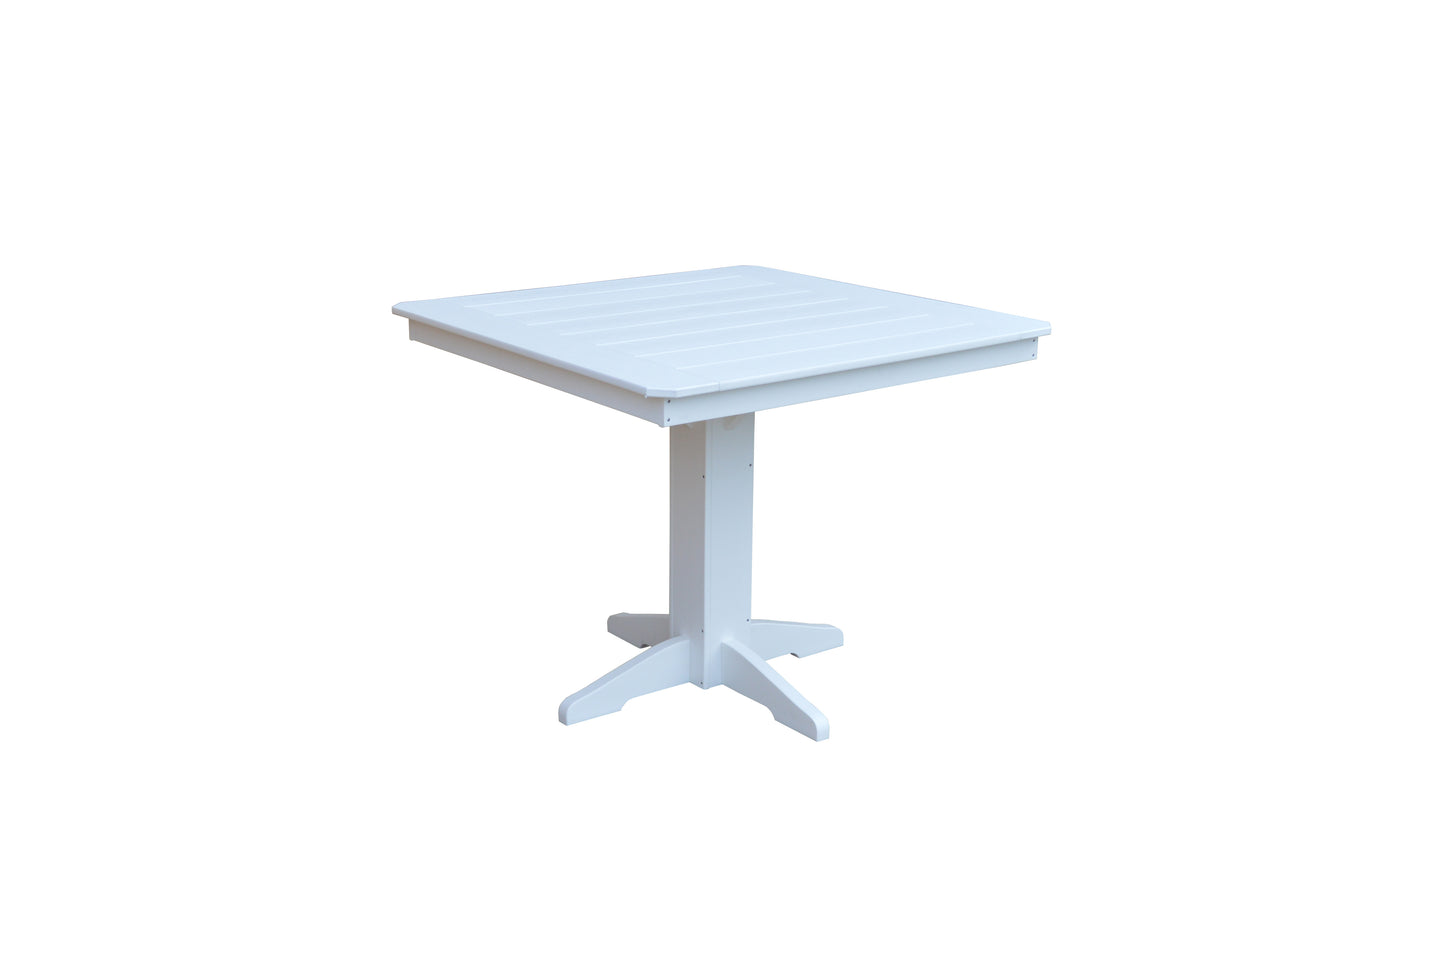 A&L Furniture Co. Recycled Plastic 44" Square Table (Counter Height) - LEAD TIME TO SHIP 10 BUSINESS DAYS